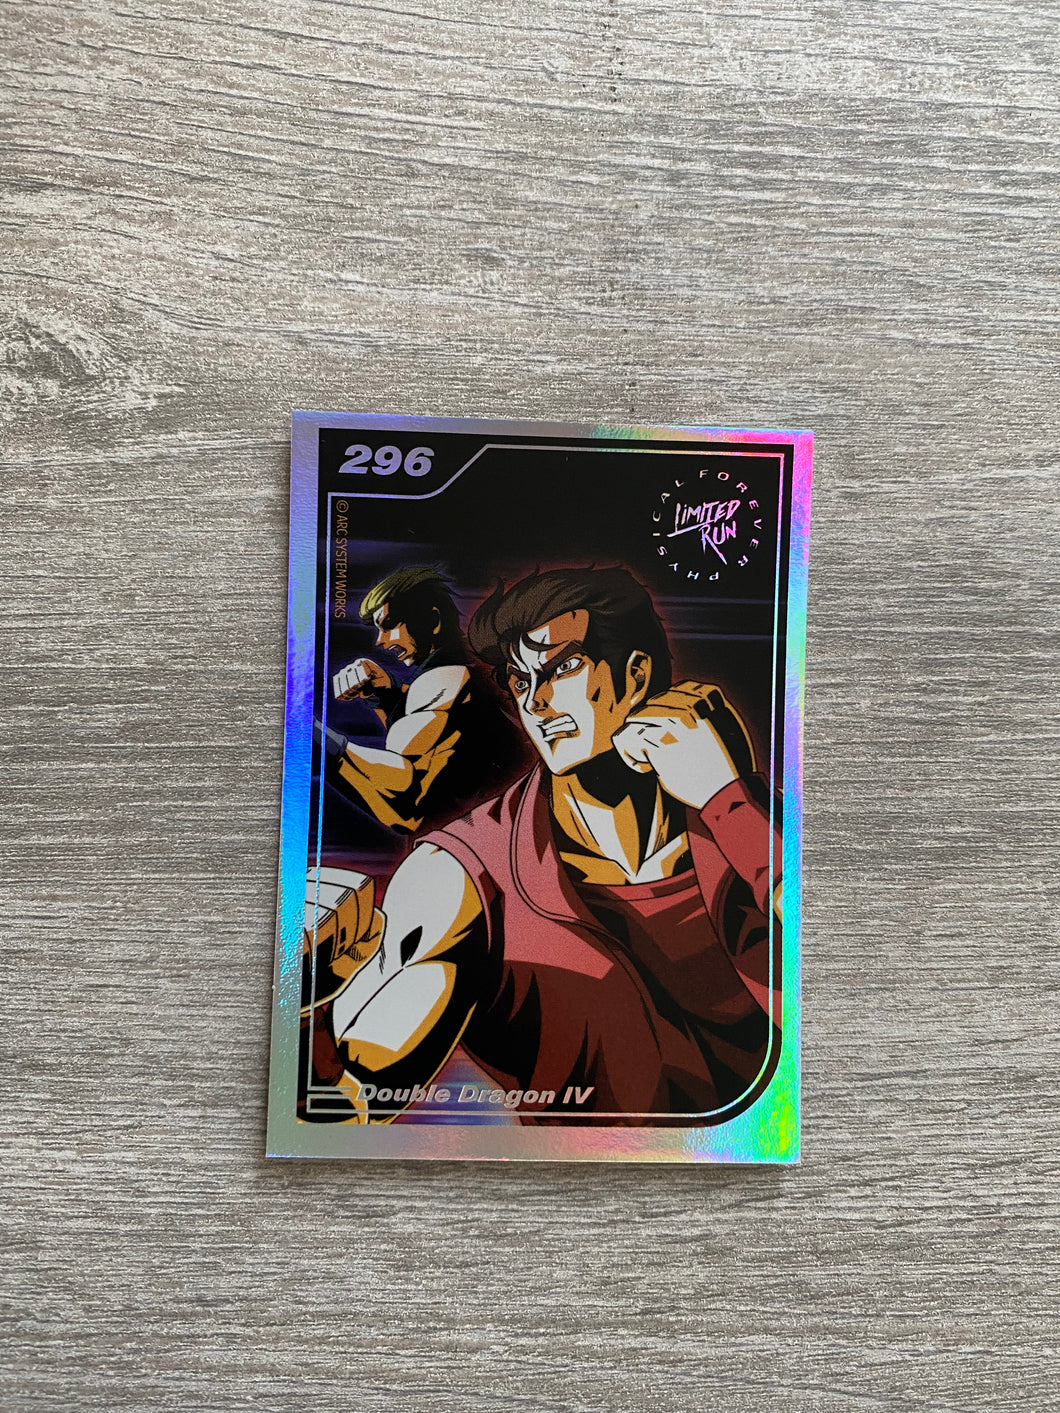 Gen2 #296 Silver Double dragon IV Limited run games trading card